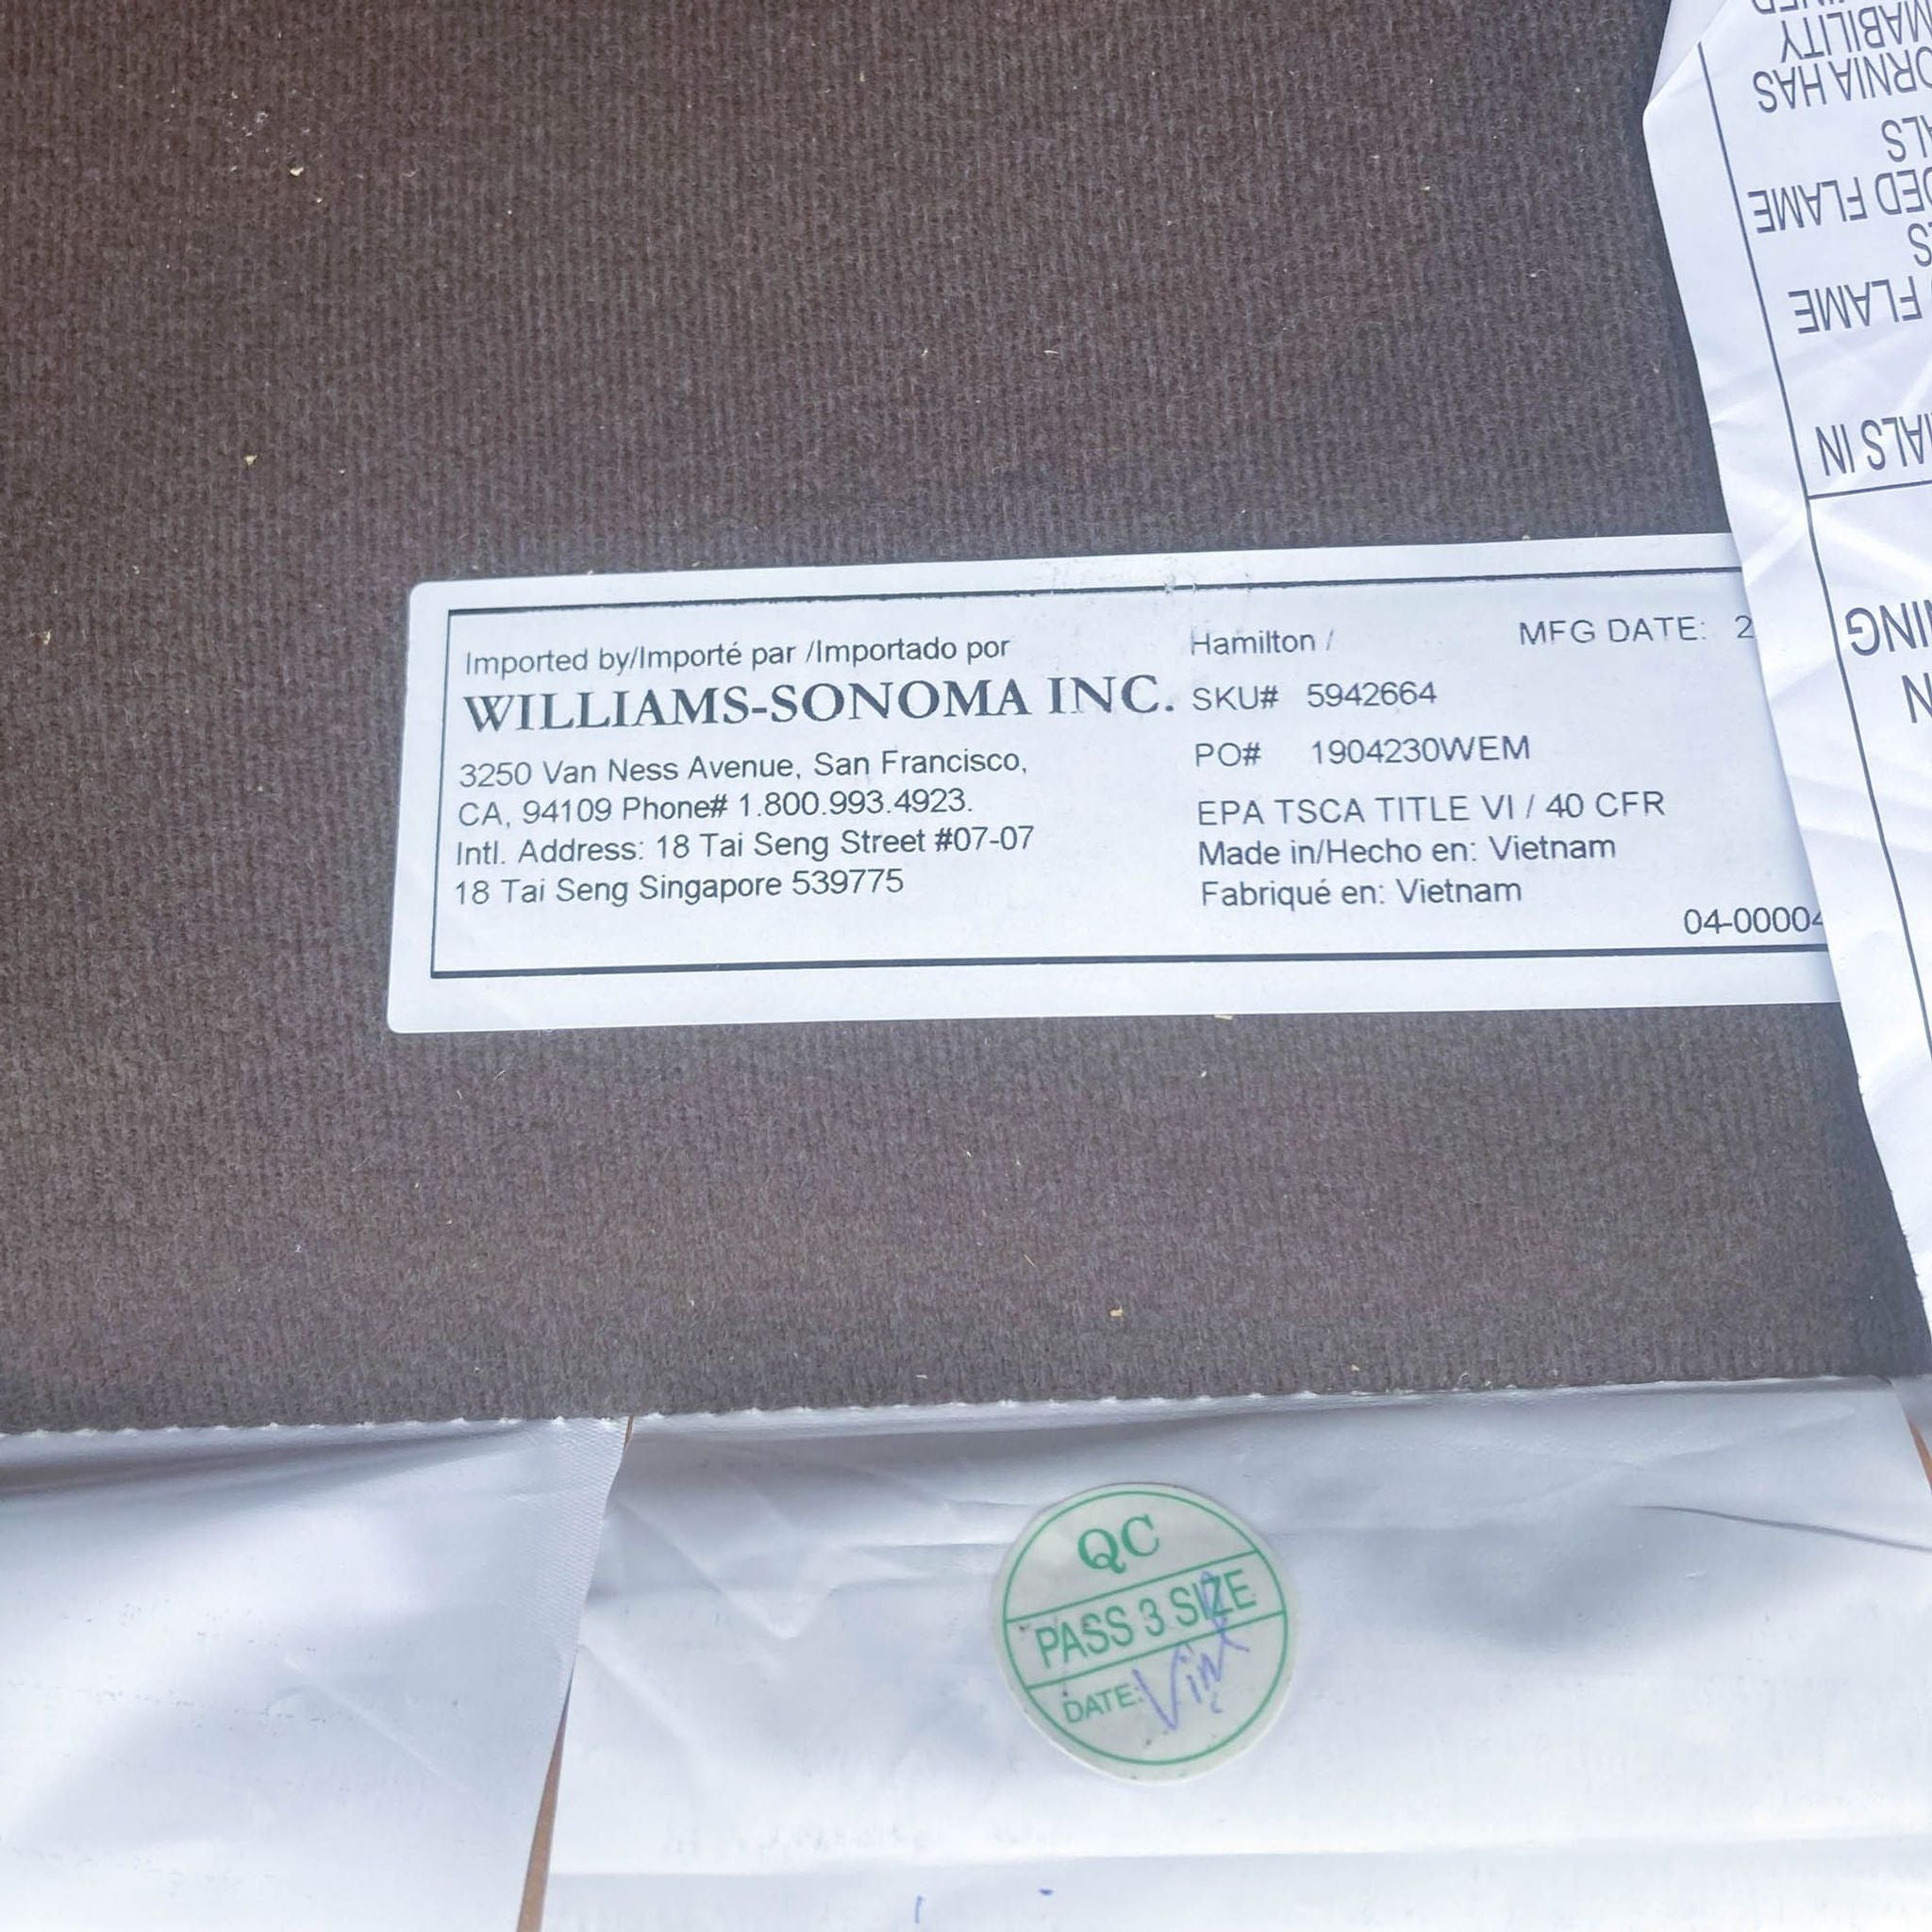 3. Information label of a West Elm Hamilton lounge chair showing import details by Williams-Sonoma Inc. and manufacturing details from Vietnam.